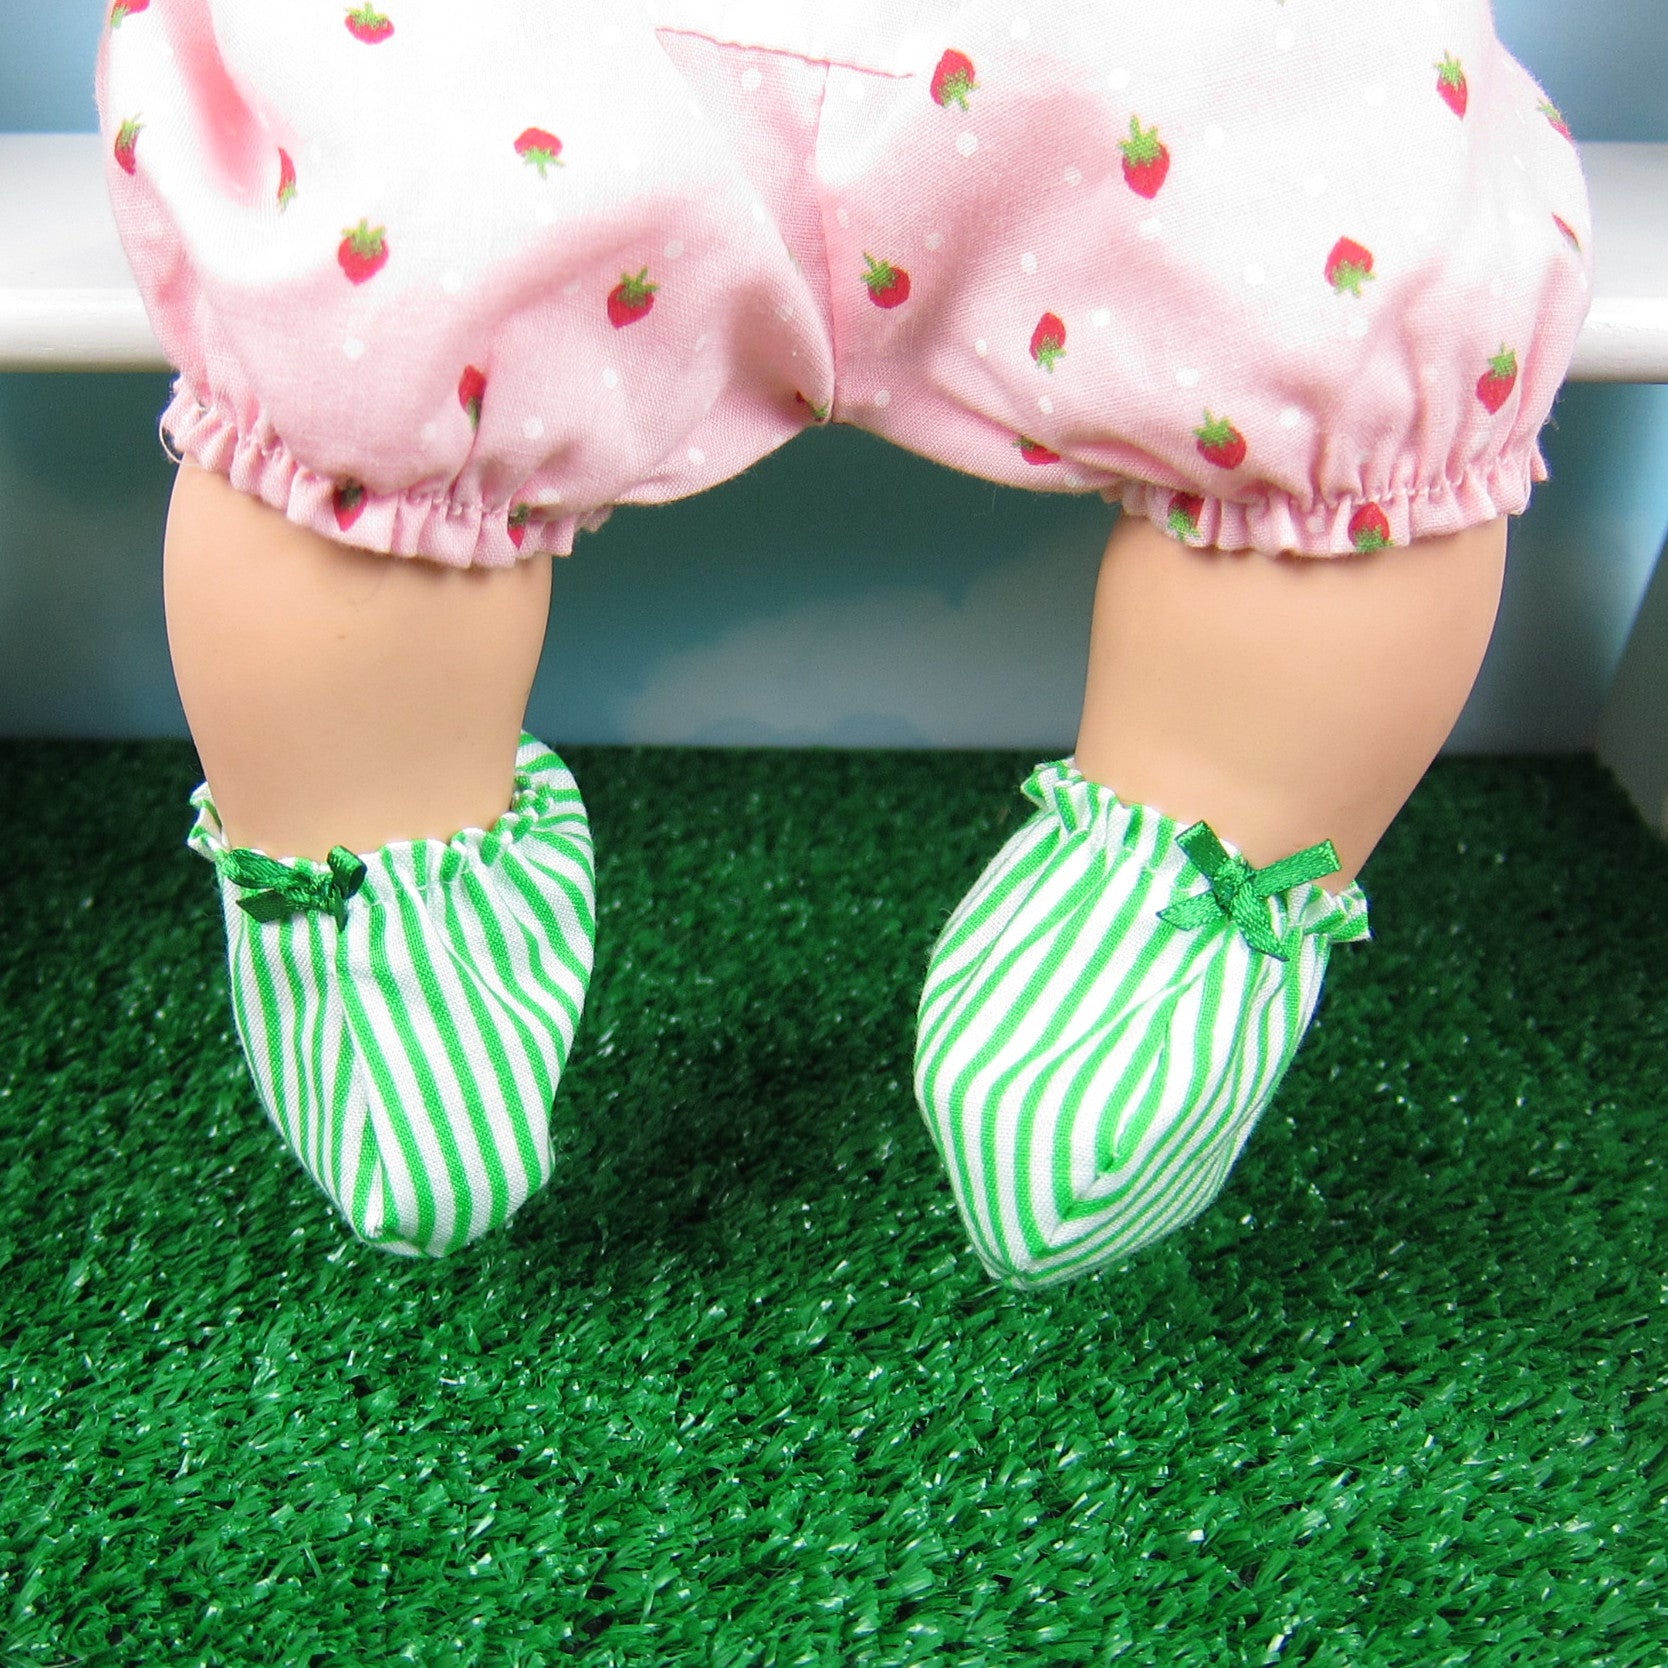 Green and white striped baby booties with green bow